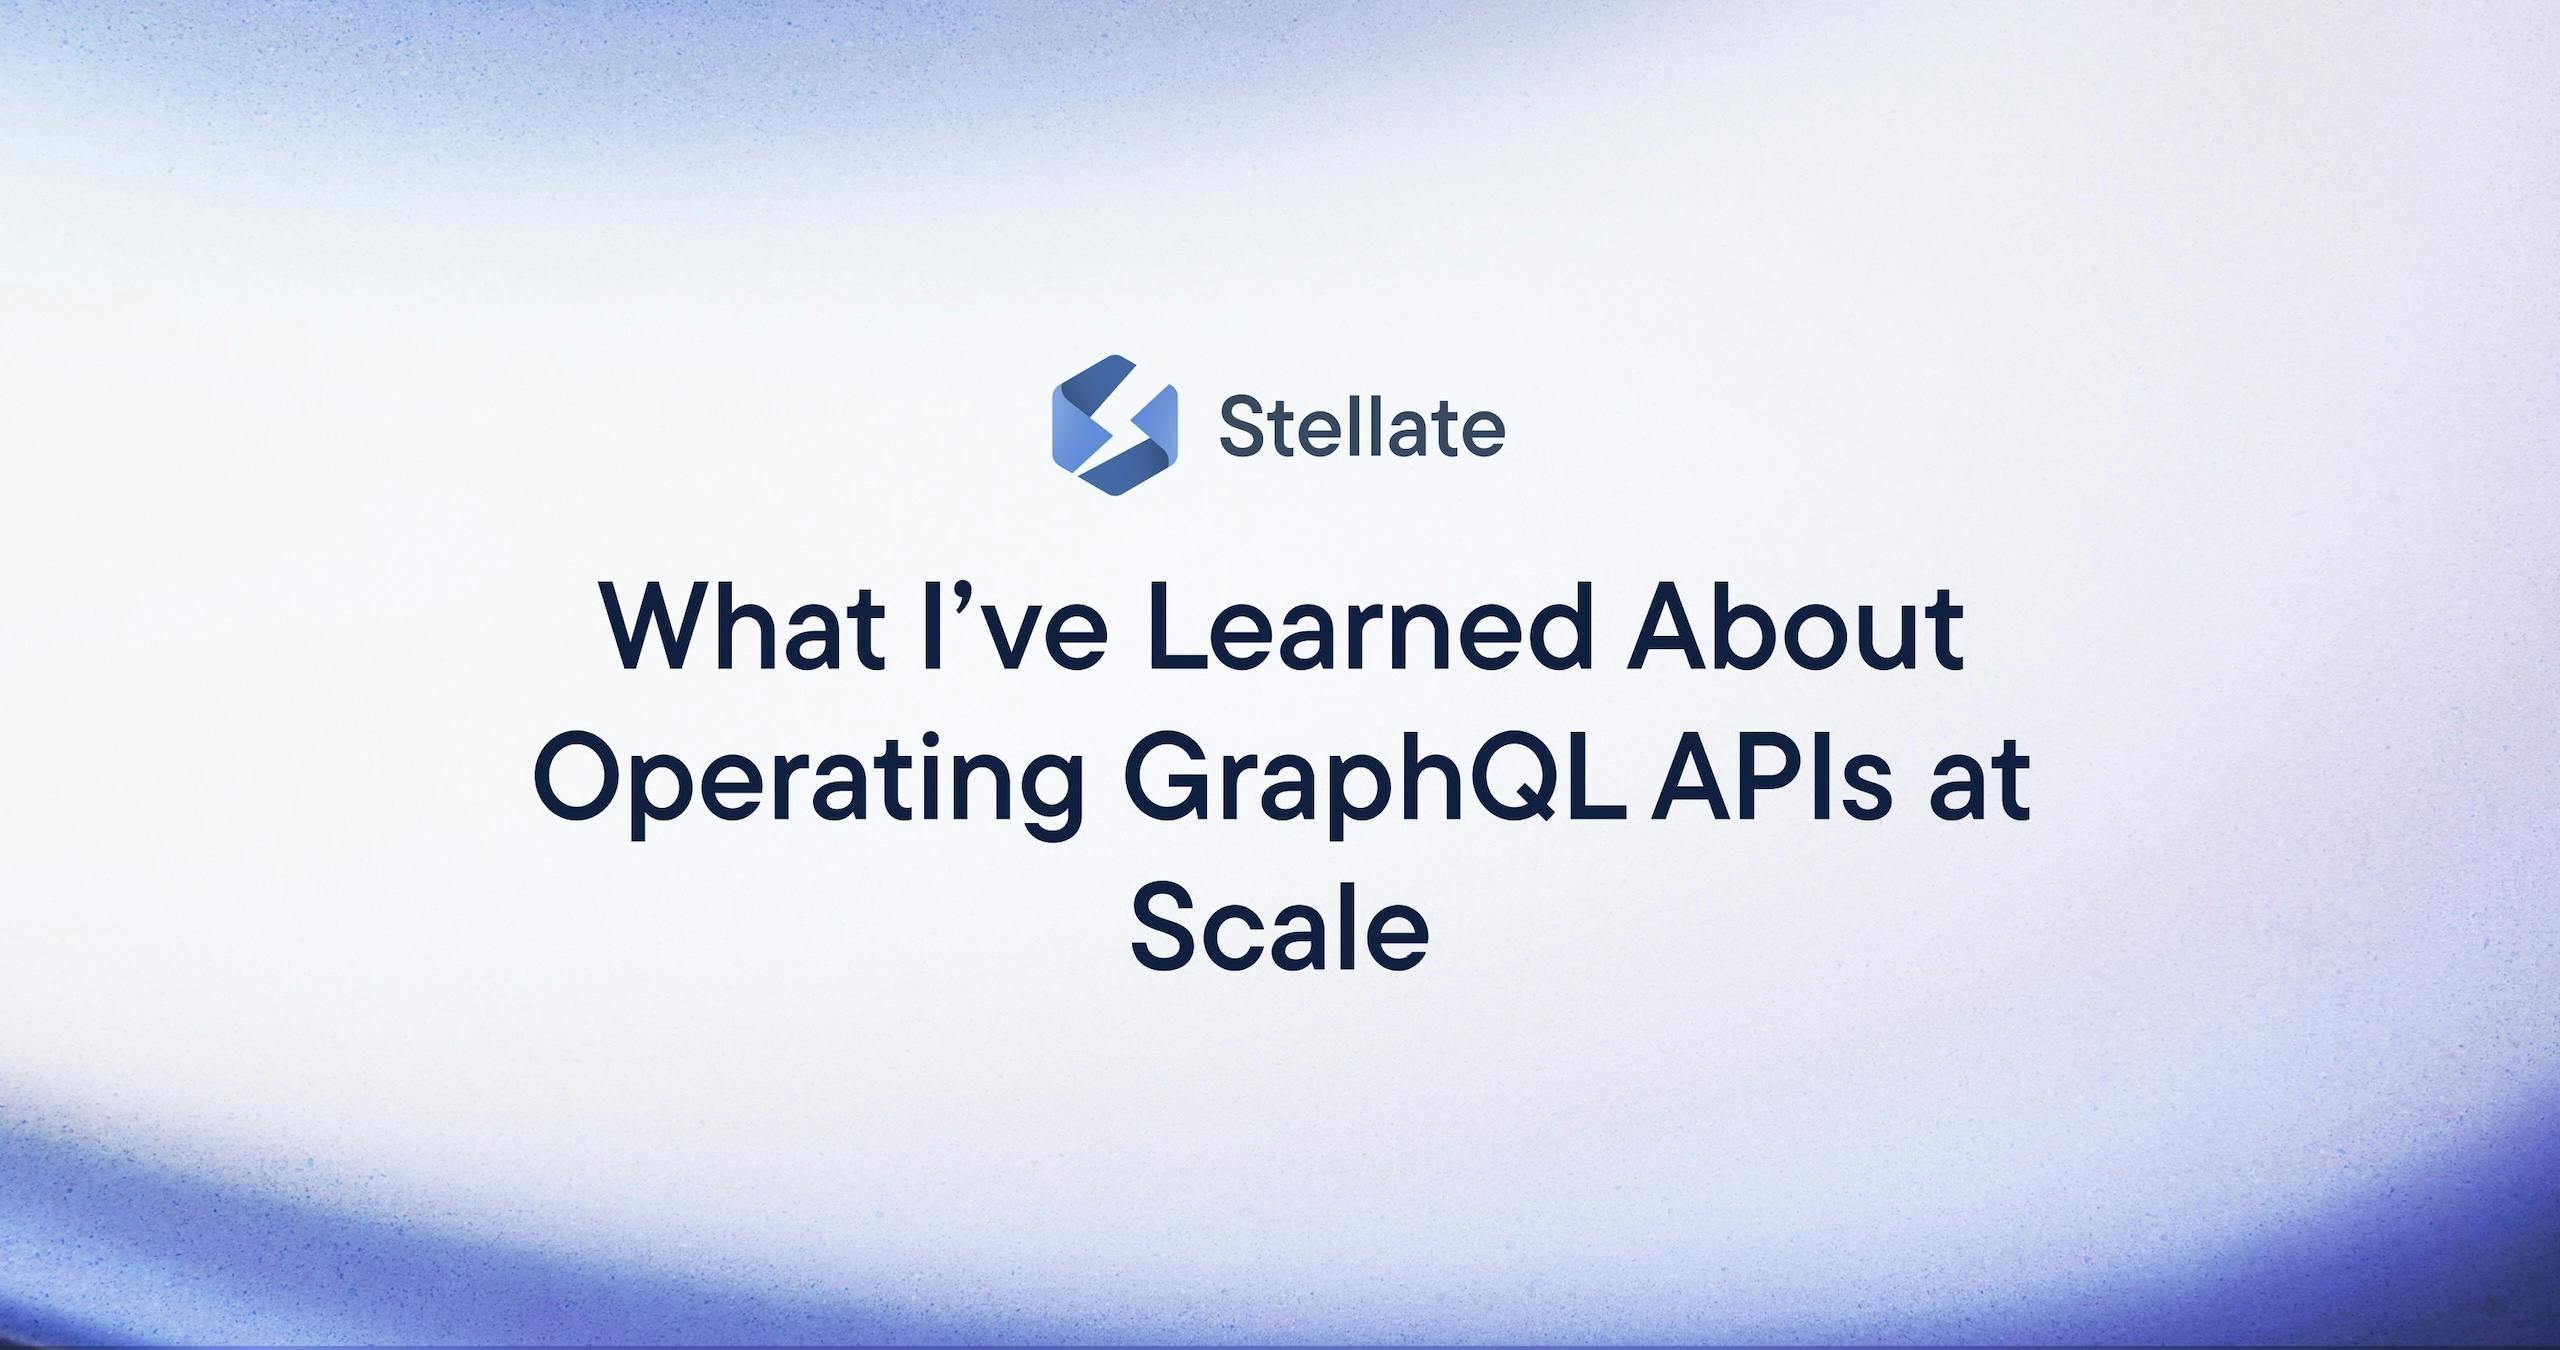 What I’ve Learned About Operating GraphQL APIs at Scale